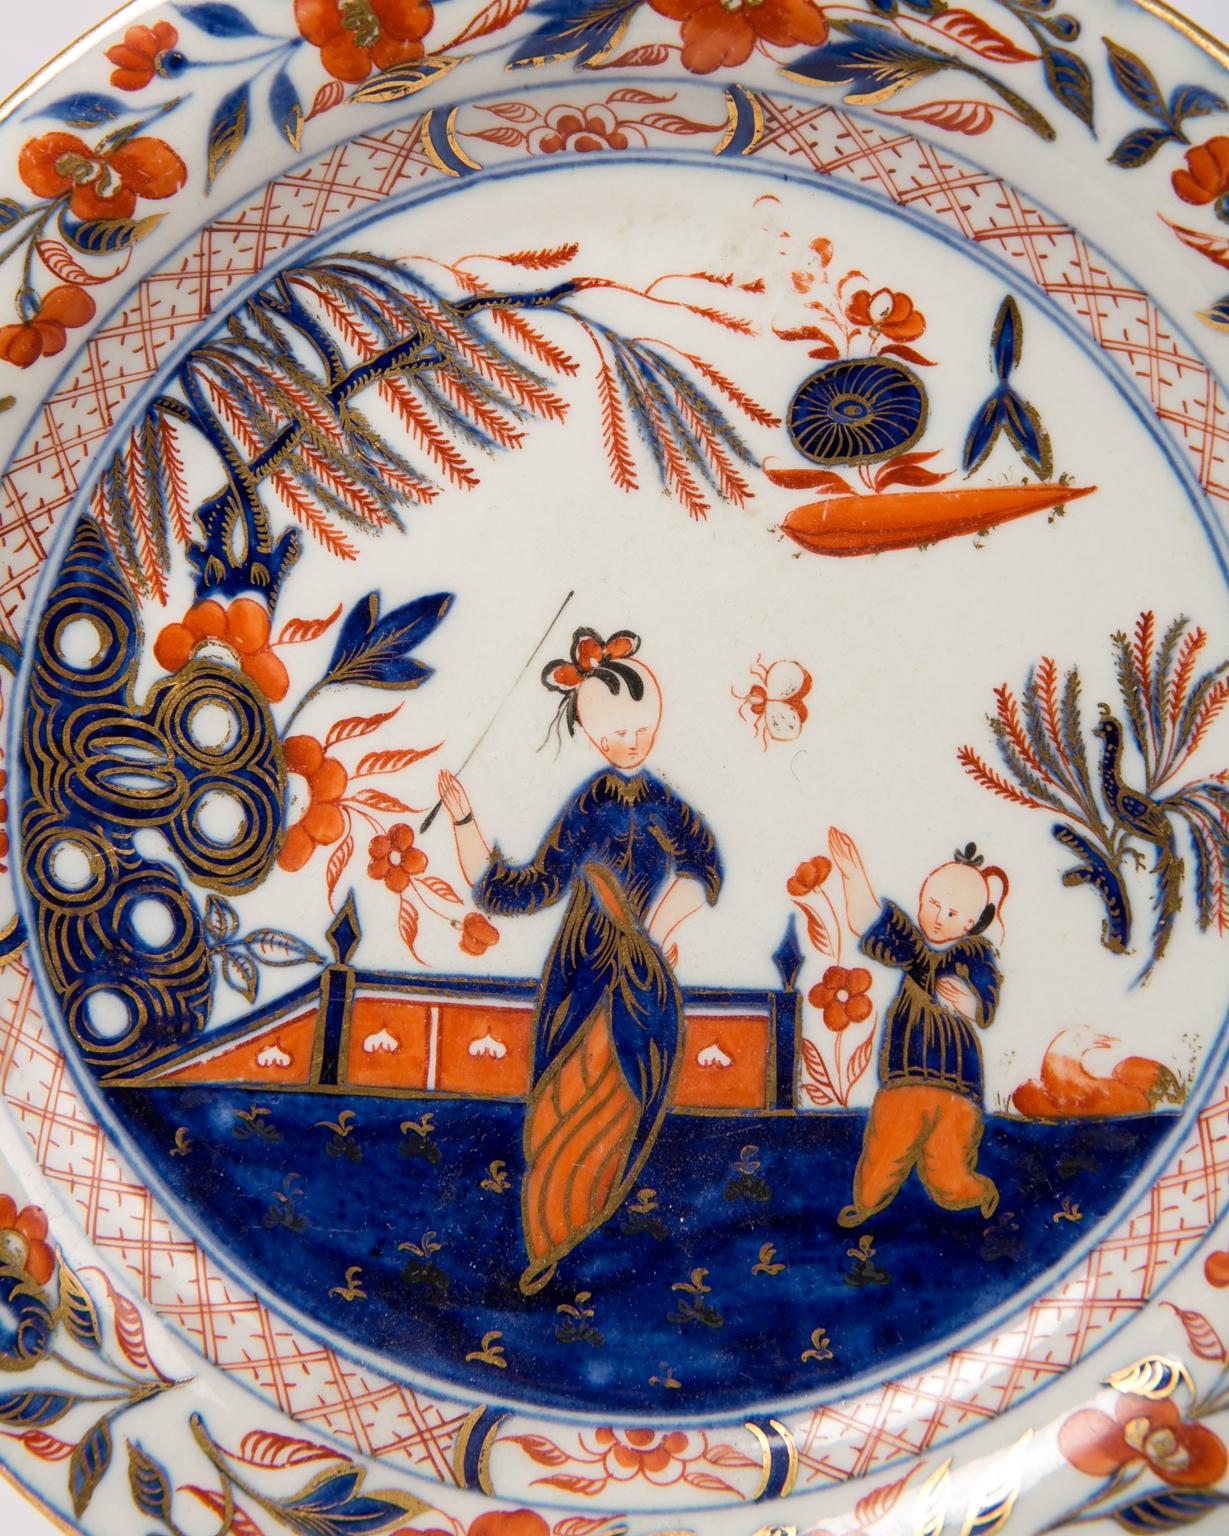 WHY WE LOVE IT: The colors! The scene!
We are pleased to offer this pair of English dishes inspired by Imari decoration showing a scene painted in cobalt blue, red and gold. We see a lady walking in a garden with her young son. The branches of a